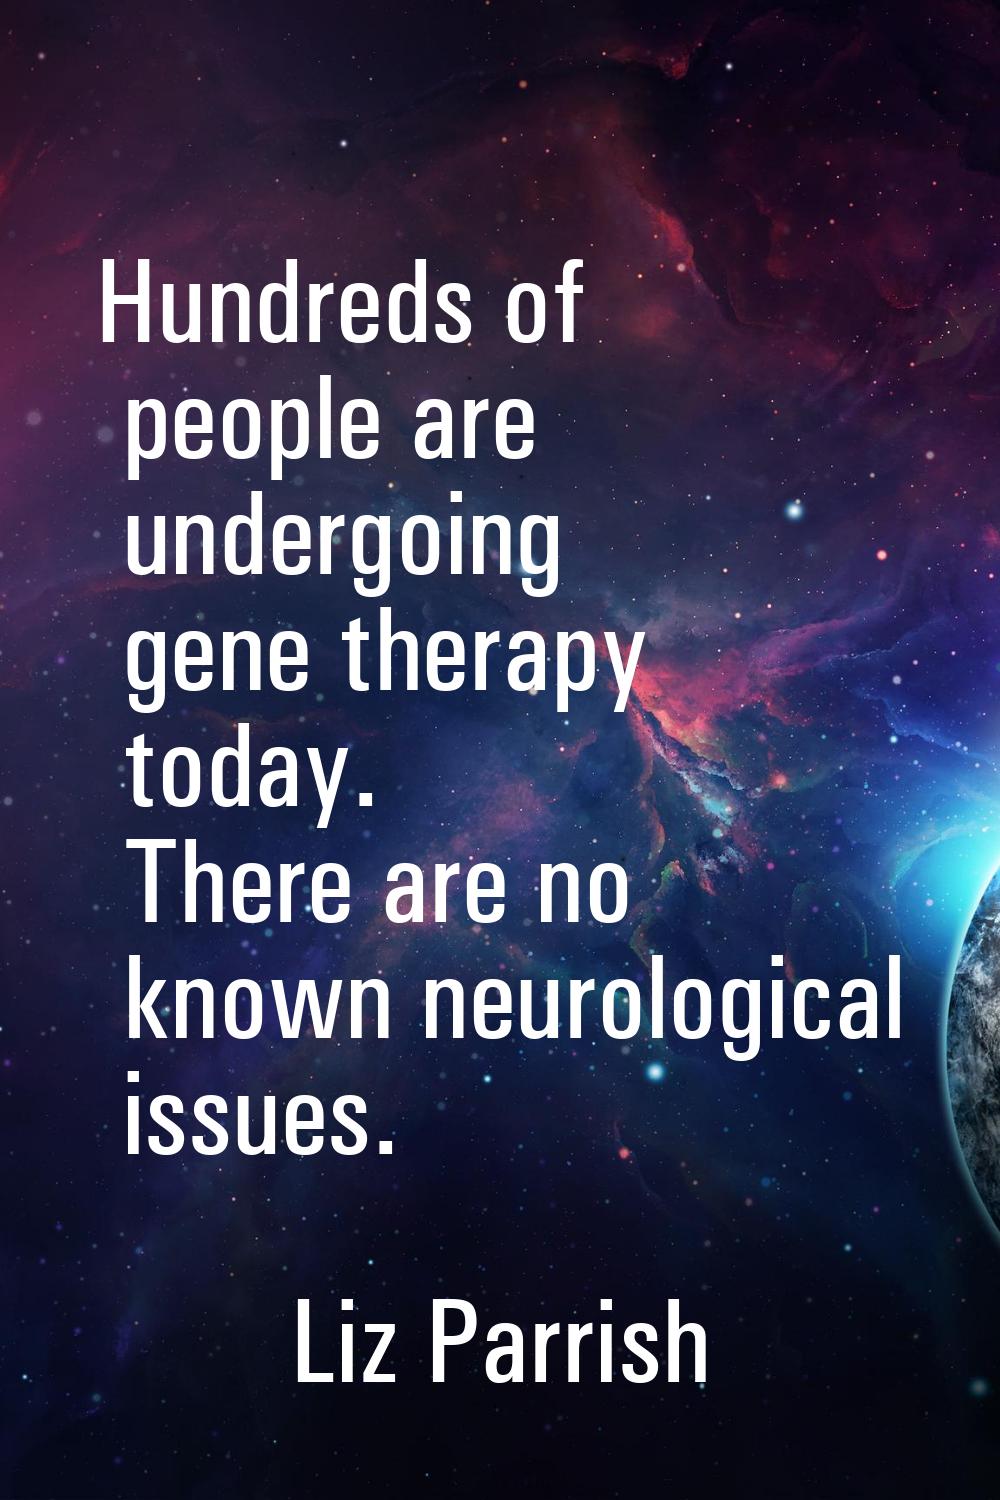 Hundreds of people are undergoing gene therapy today. There are no known neurological issues.